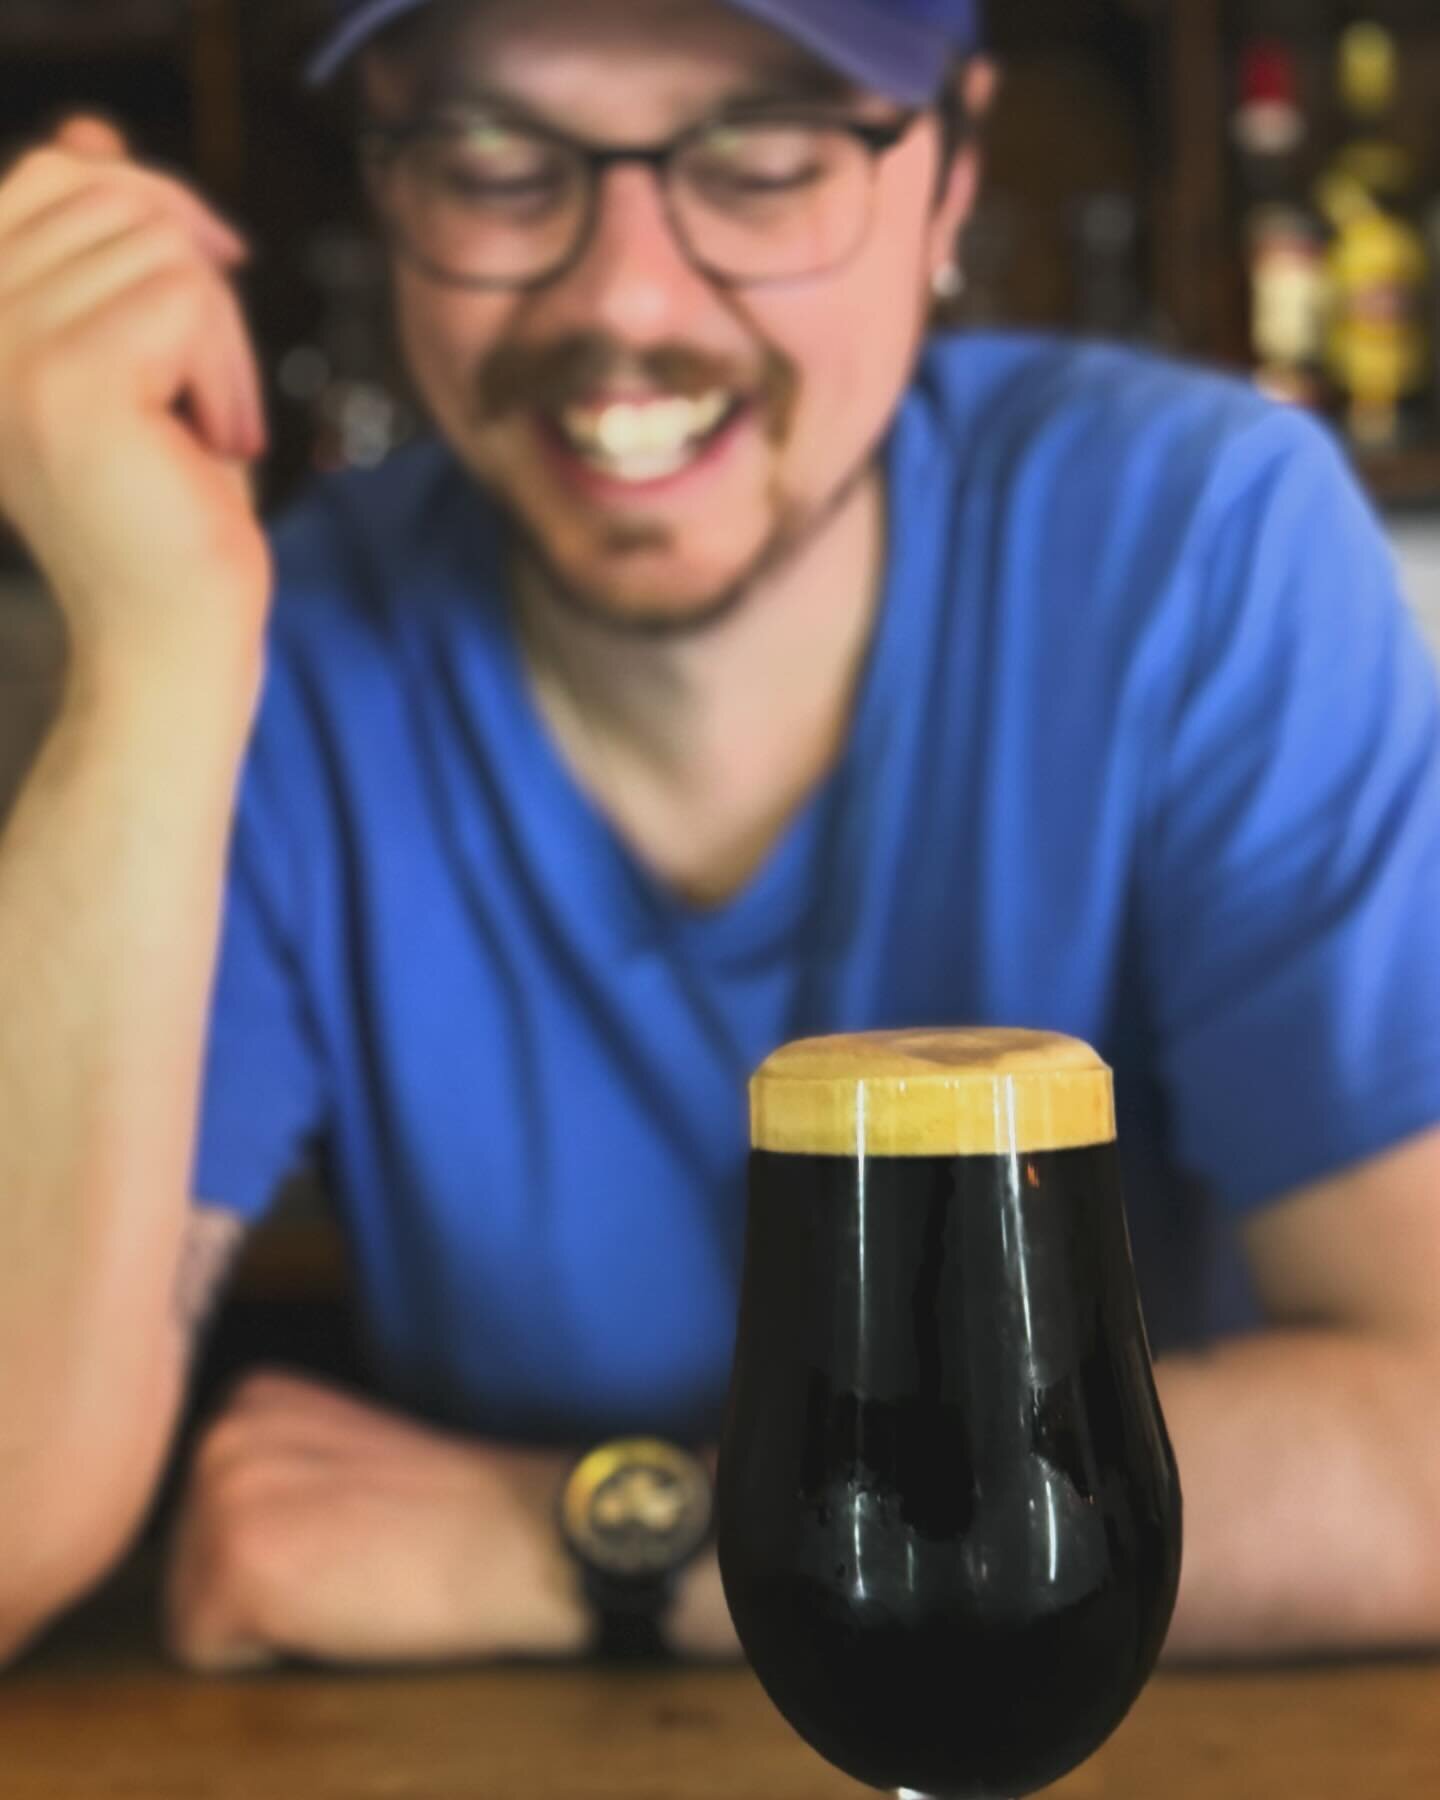 Geordie Joel says&hellip;

&ldquo;Eee, gan on, tek a deek at this bonny brew in me schooner. Proper lush, like. It&rsquo;s a reet good stout, this. Cannit wait to get it doon me gullet. Cheers, pet!&rdquo;

Translation for clarity: &ldquo;Hey, come o